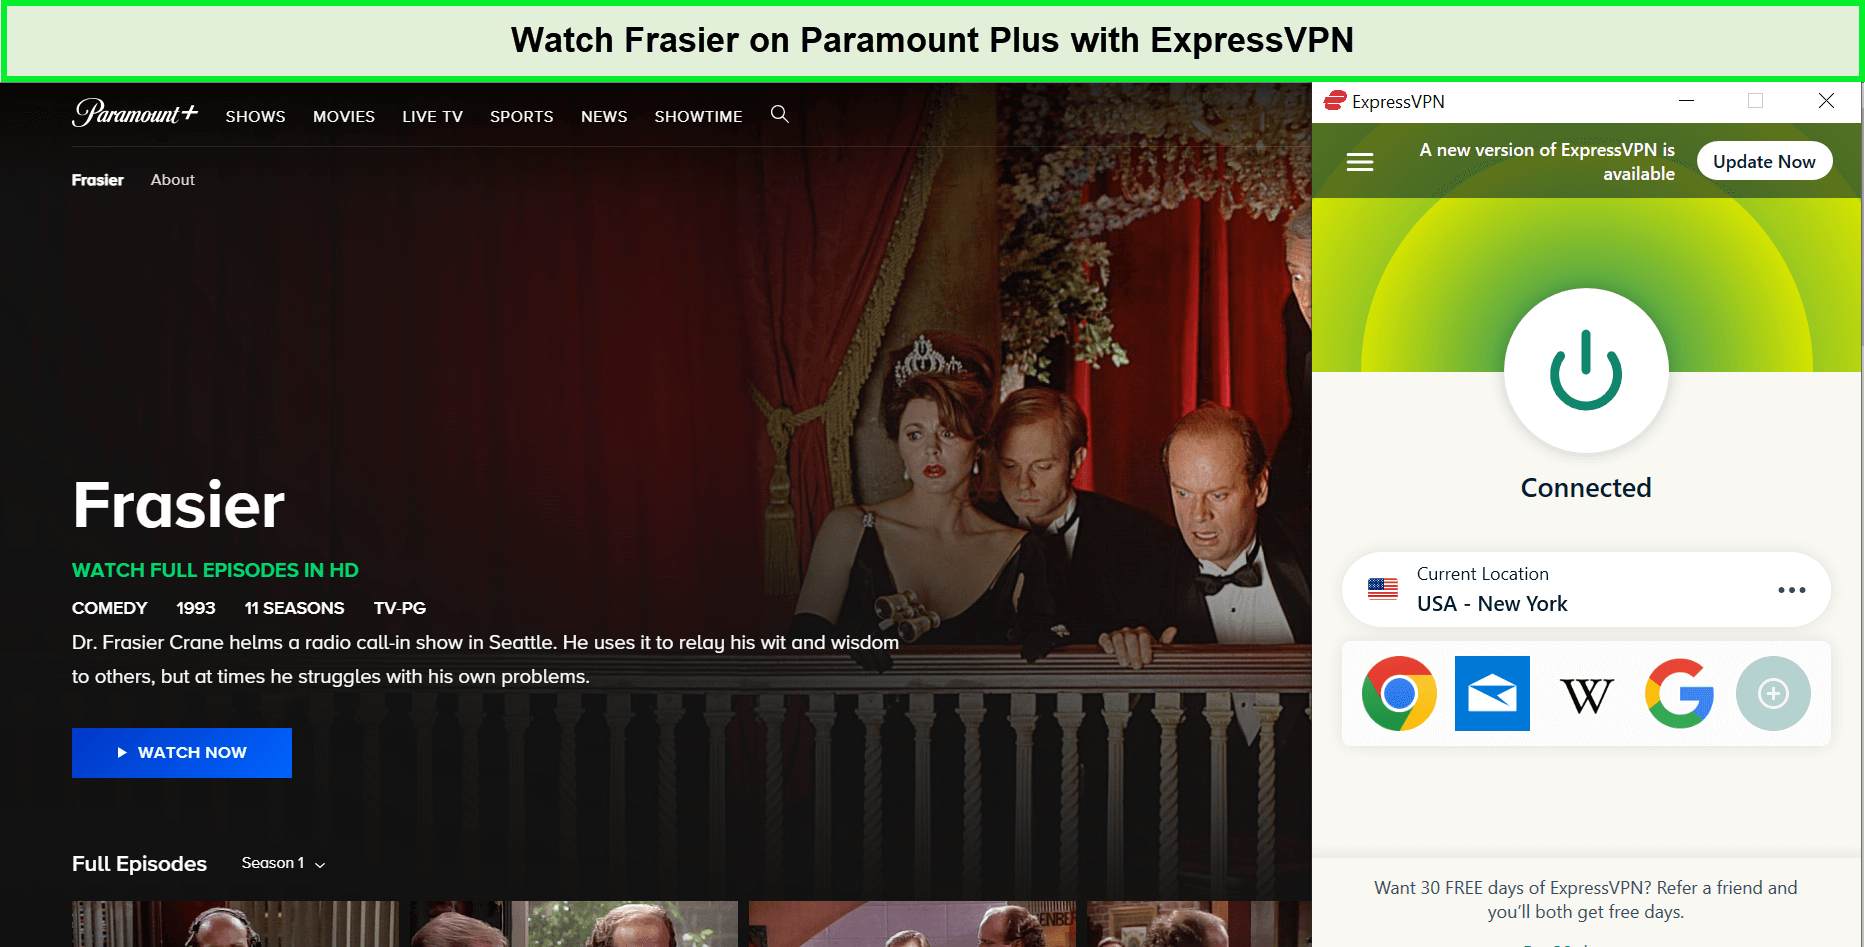 Watch-Frasier-on-Paramount-Plus-in-Italy-with-ExpressVPN